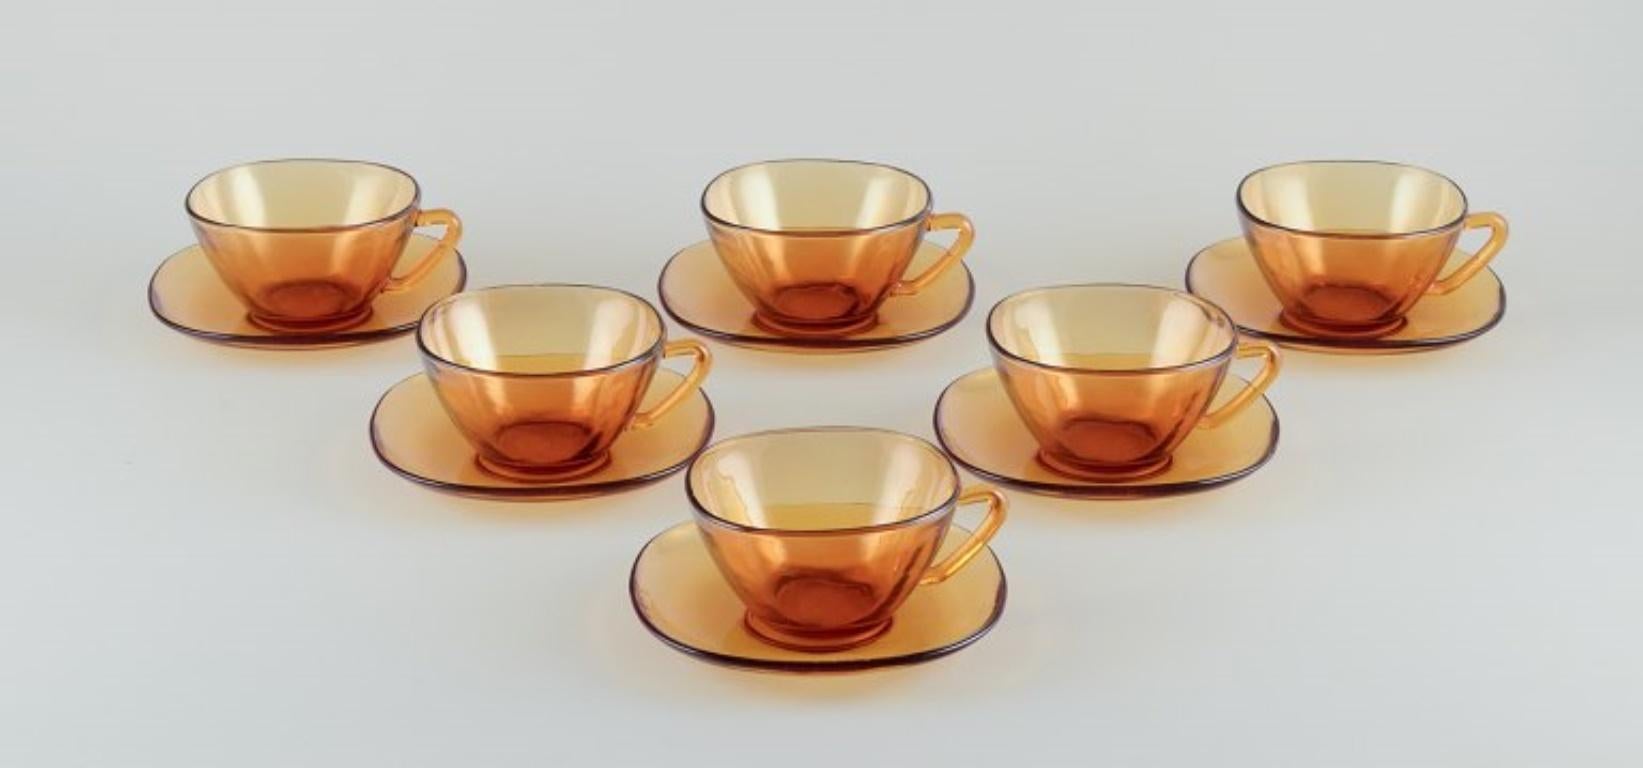 Vereco, France. Six-person tea set in amber glass. Modernist design.
From the 1970s.
Marked.
In good condition with minimal signs of use.
Cup: D 10.8 cm without handle x H 6.0 cm.
Saucer: 15.0 cm.